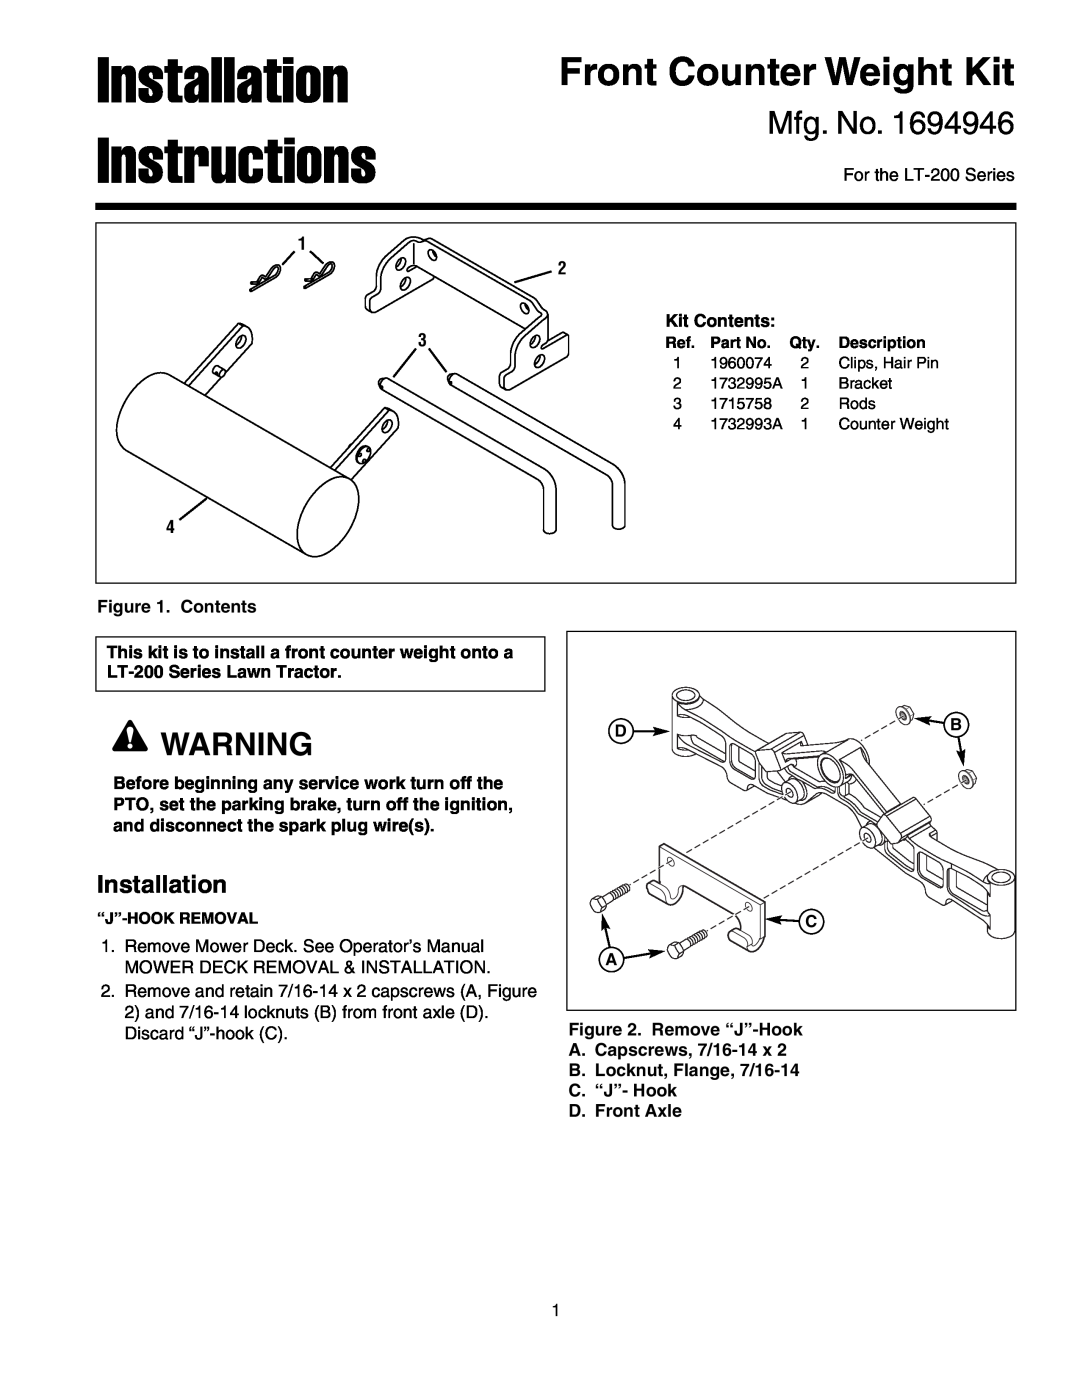 Snapper 1694946 installation instructions Installation Instructions, Front Counter Weight Kit, Mfg. No 